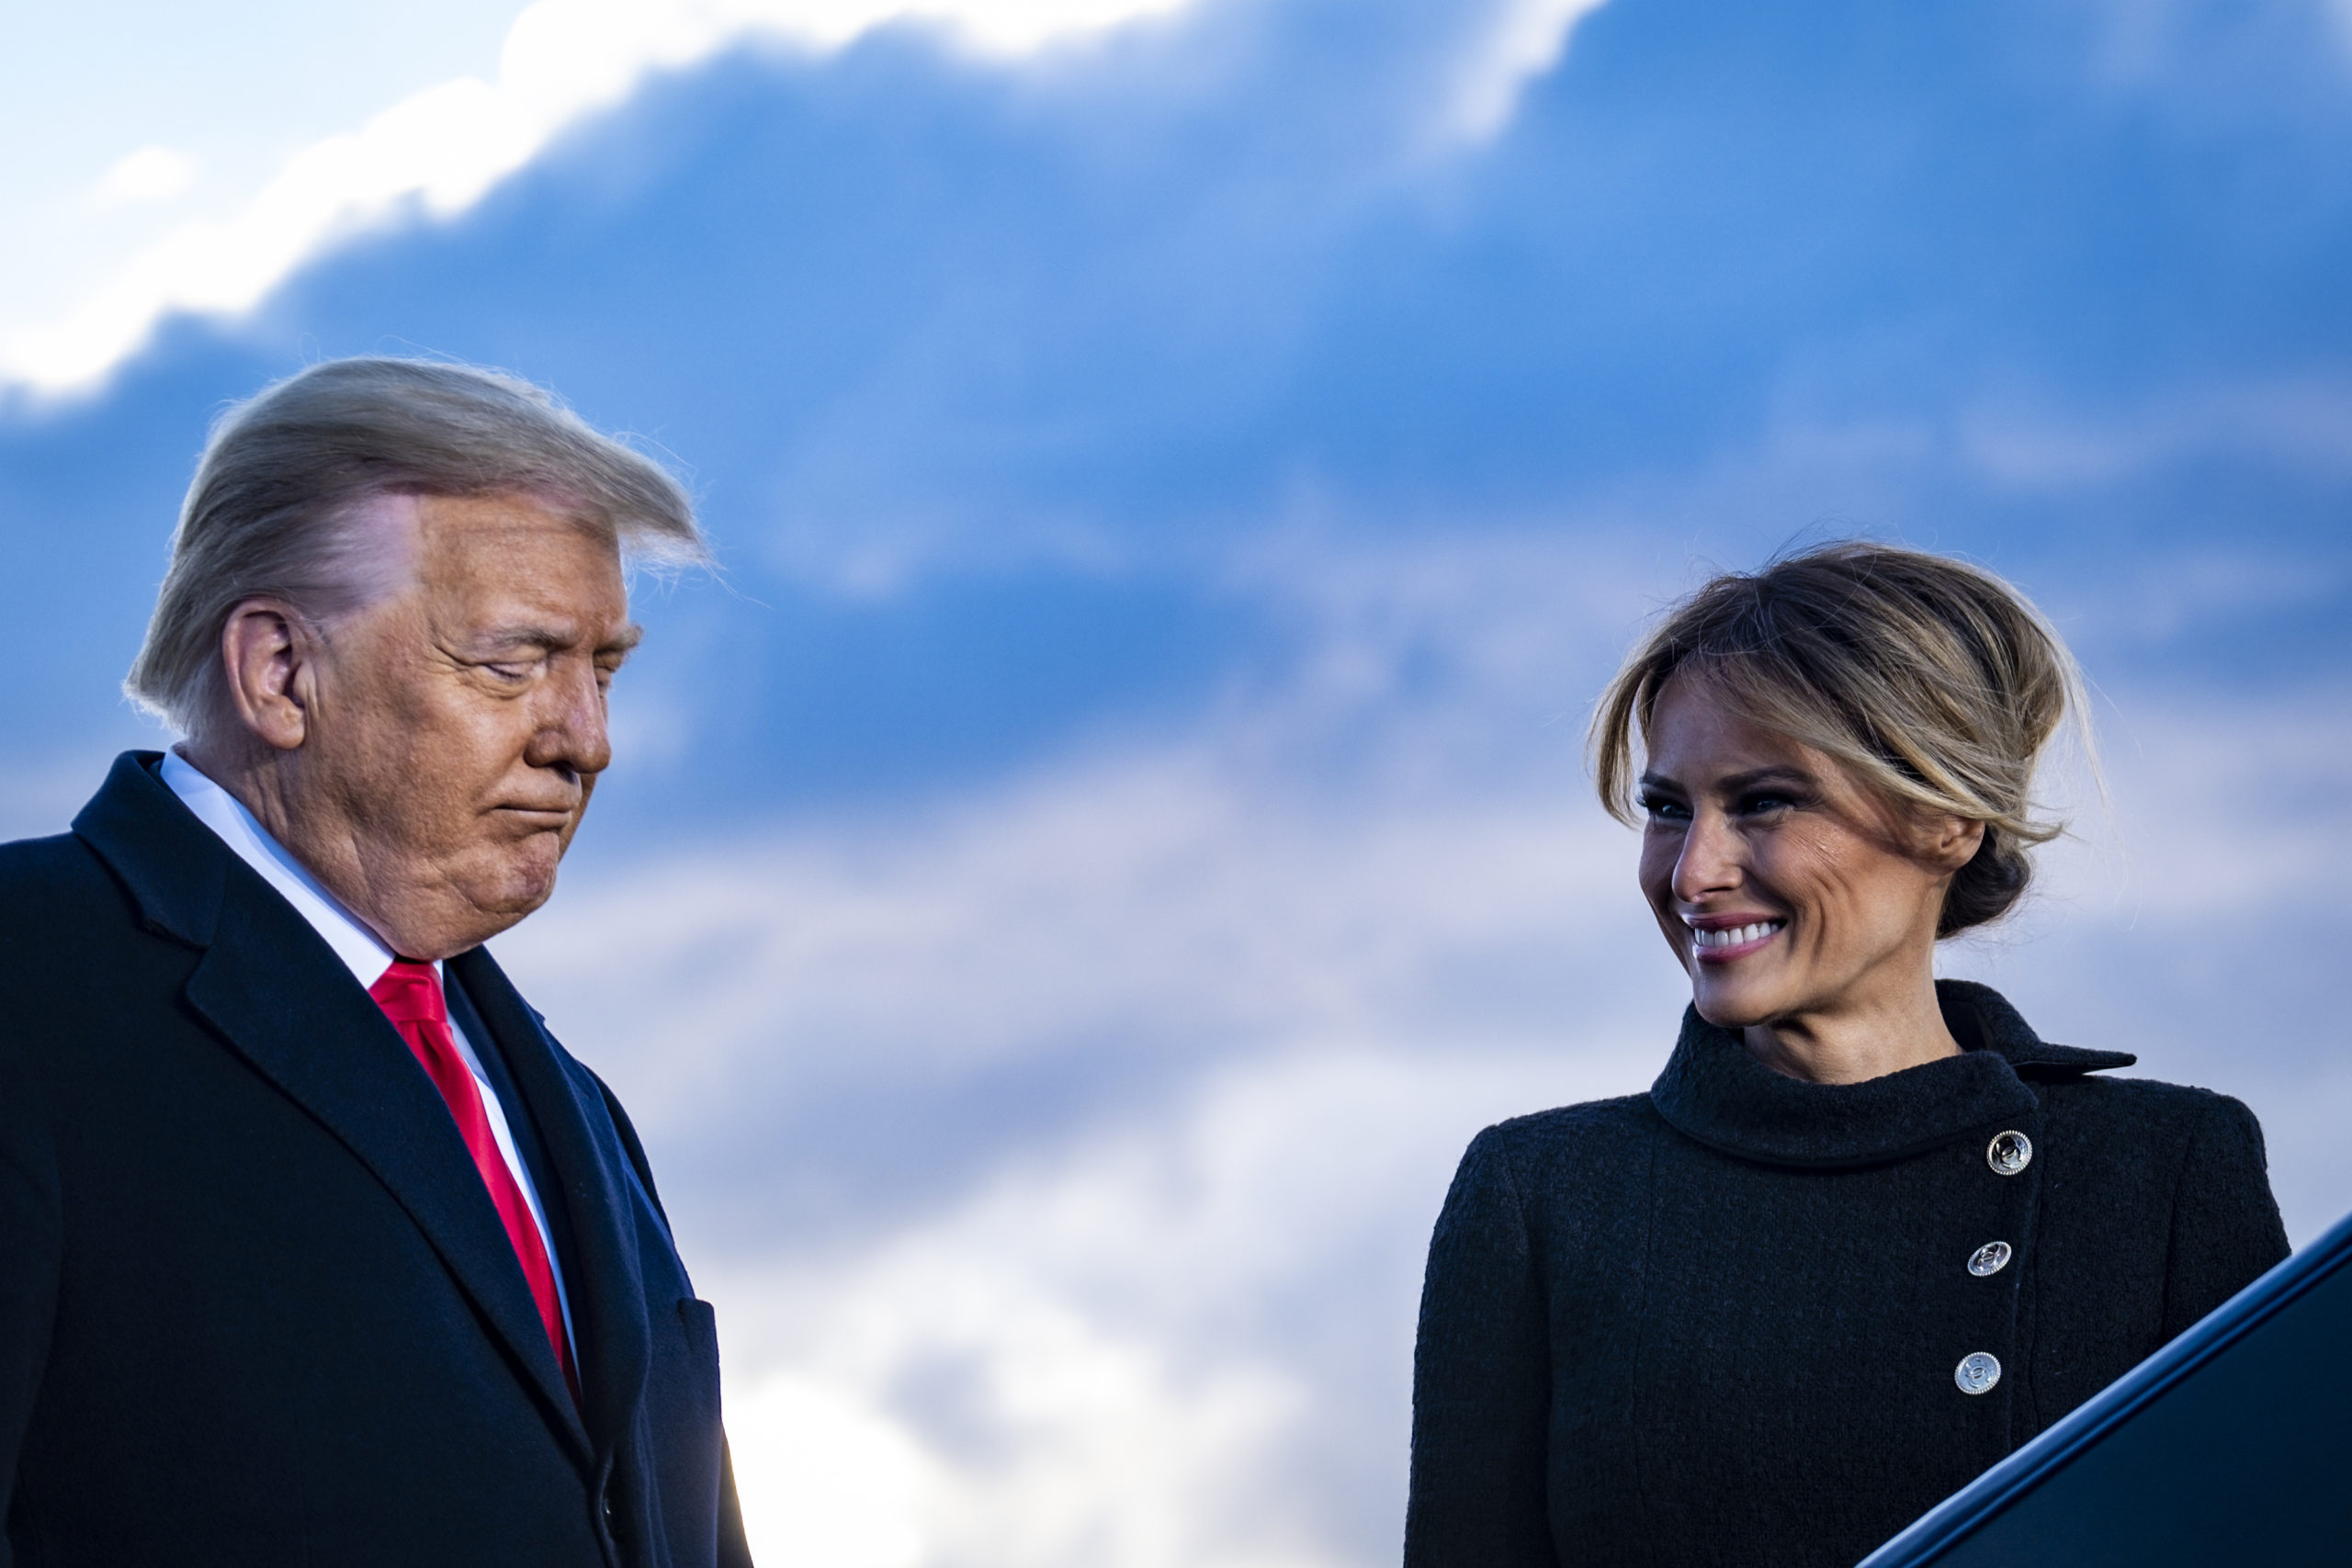 President Donald Trump and First Lady Melania Trump pause while speaking to supporters at Joint Base Andrews before boarding Air Force One for his last time as President on January 20, 2021 in Joint Base Andrews, Maryland. (Pete Marovich - Pool/Getty Images)